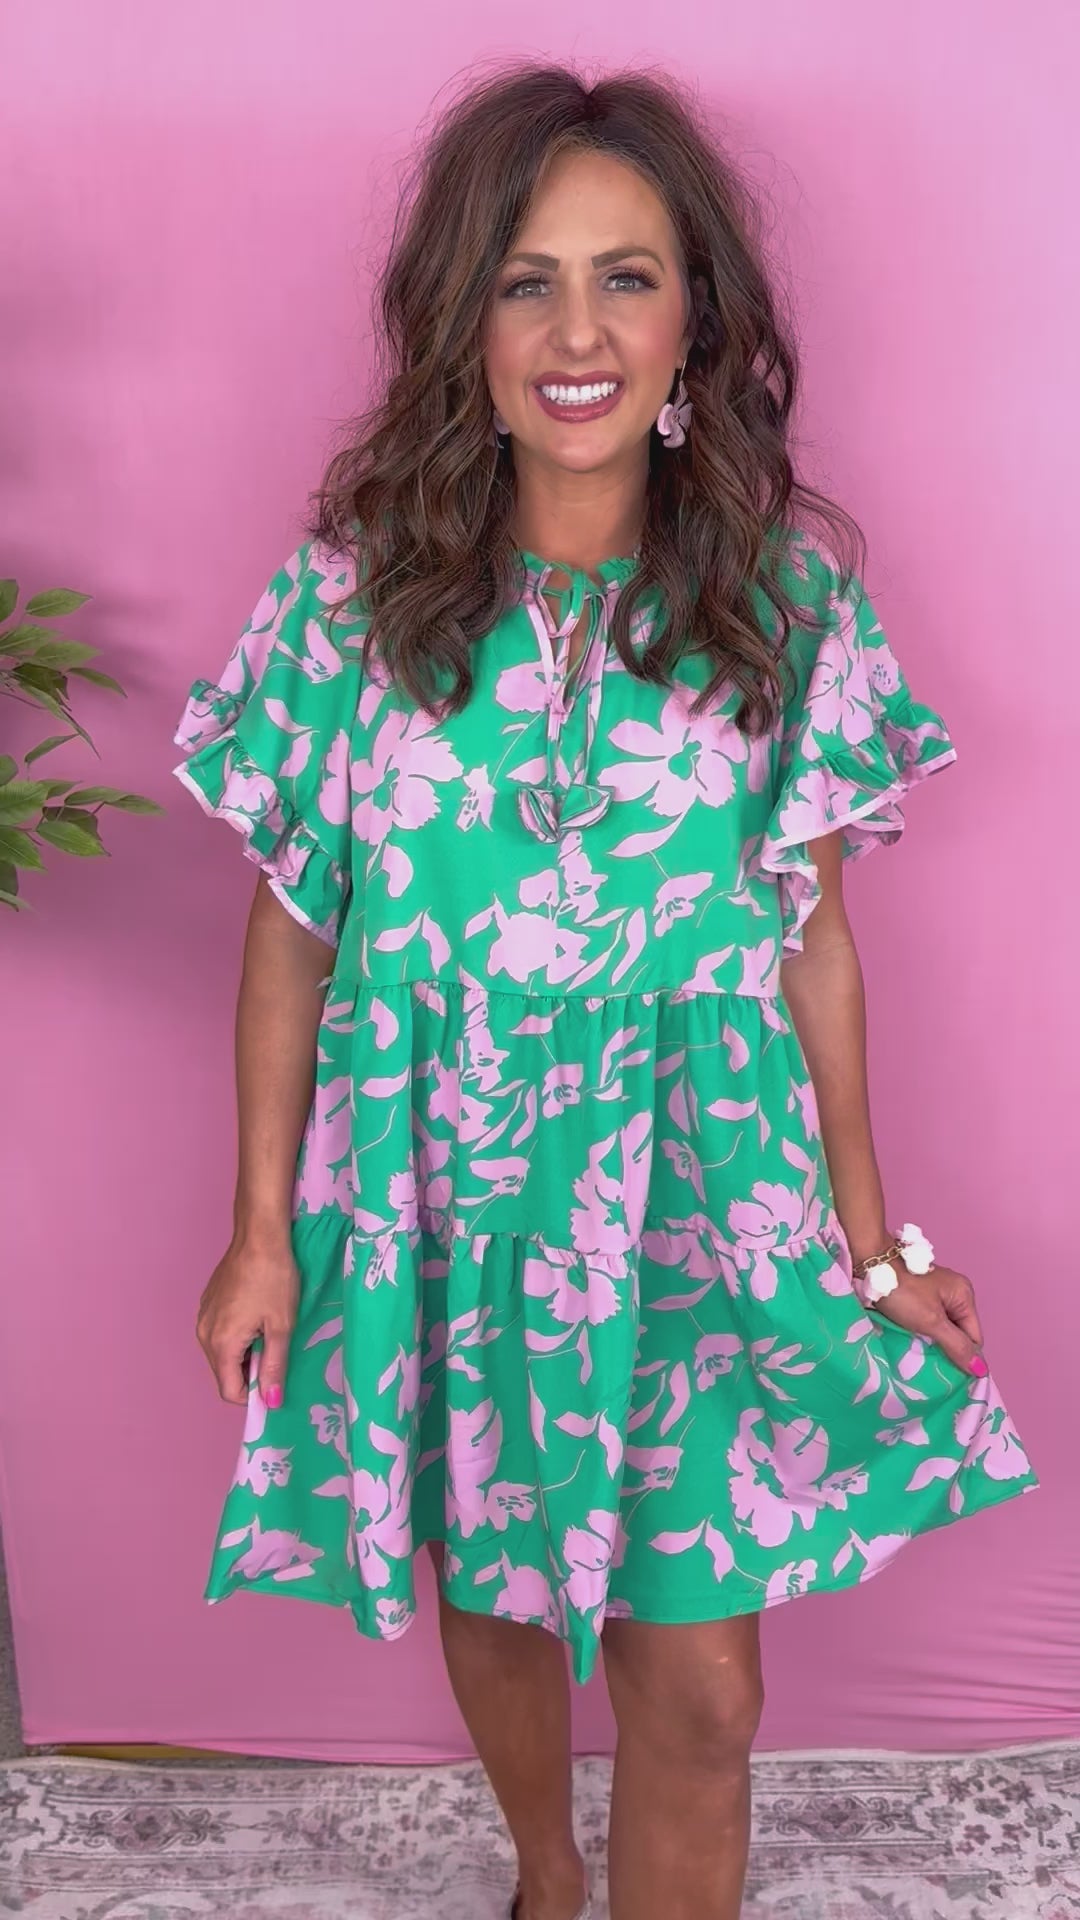 Green A-Line Tiered Dress - Available Small Through Extended Sizes - Final Sale